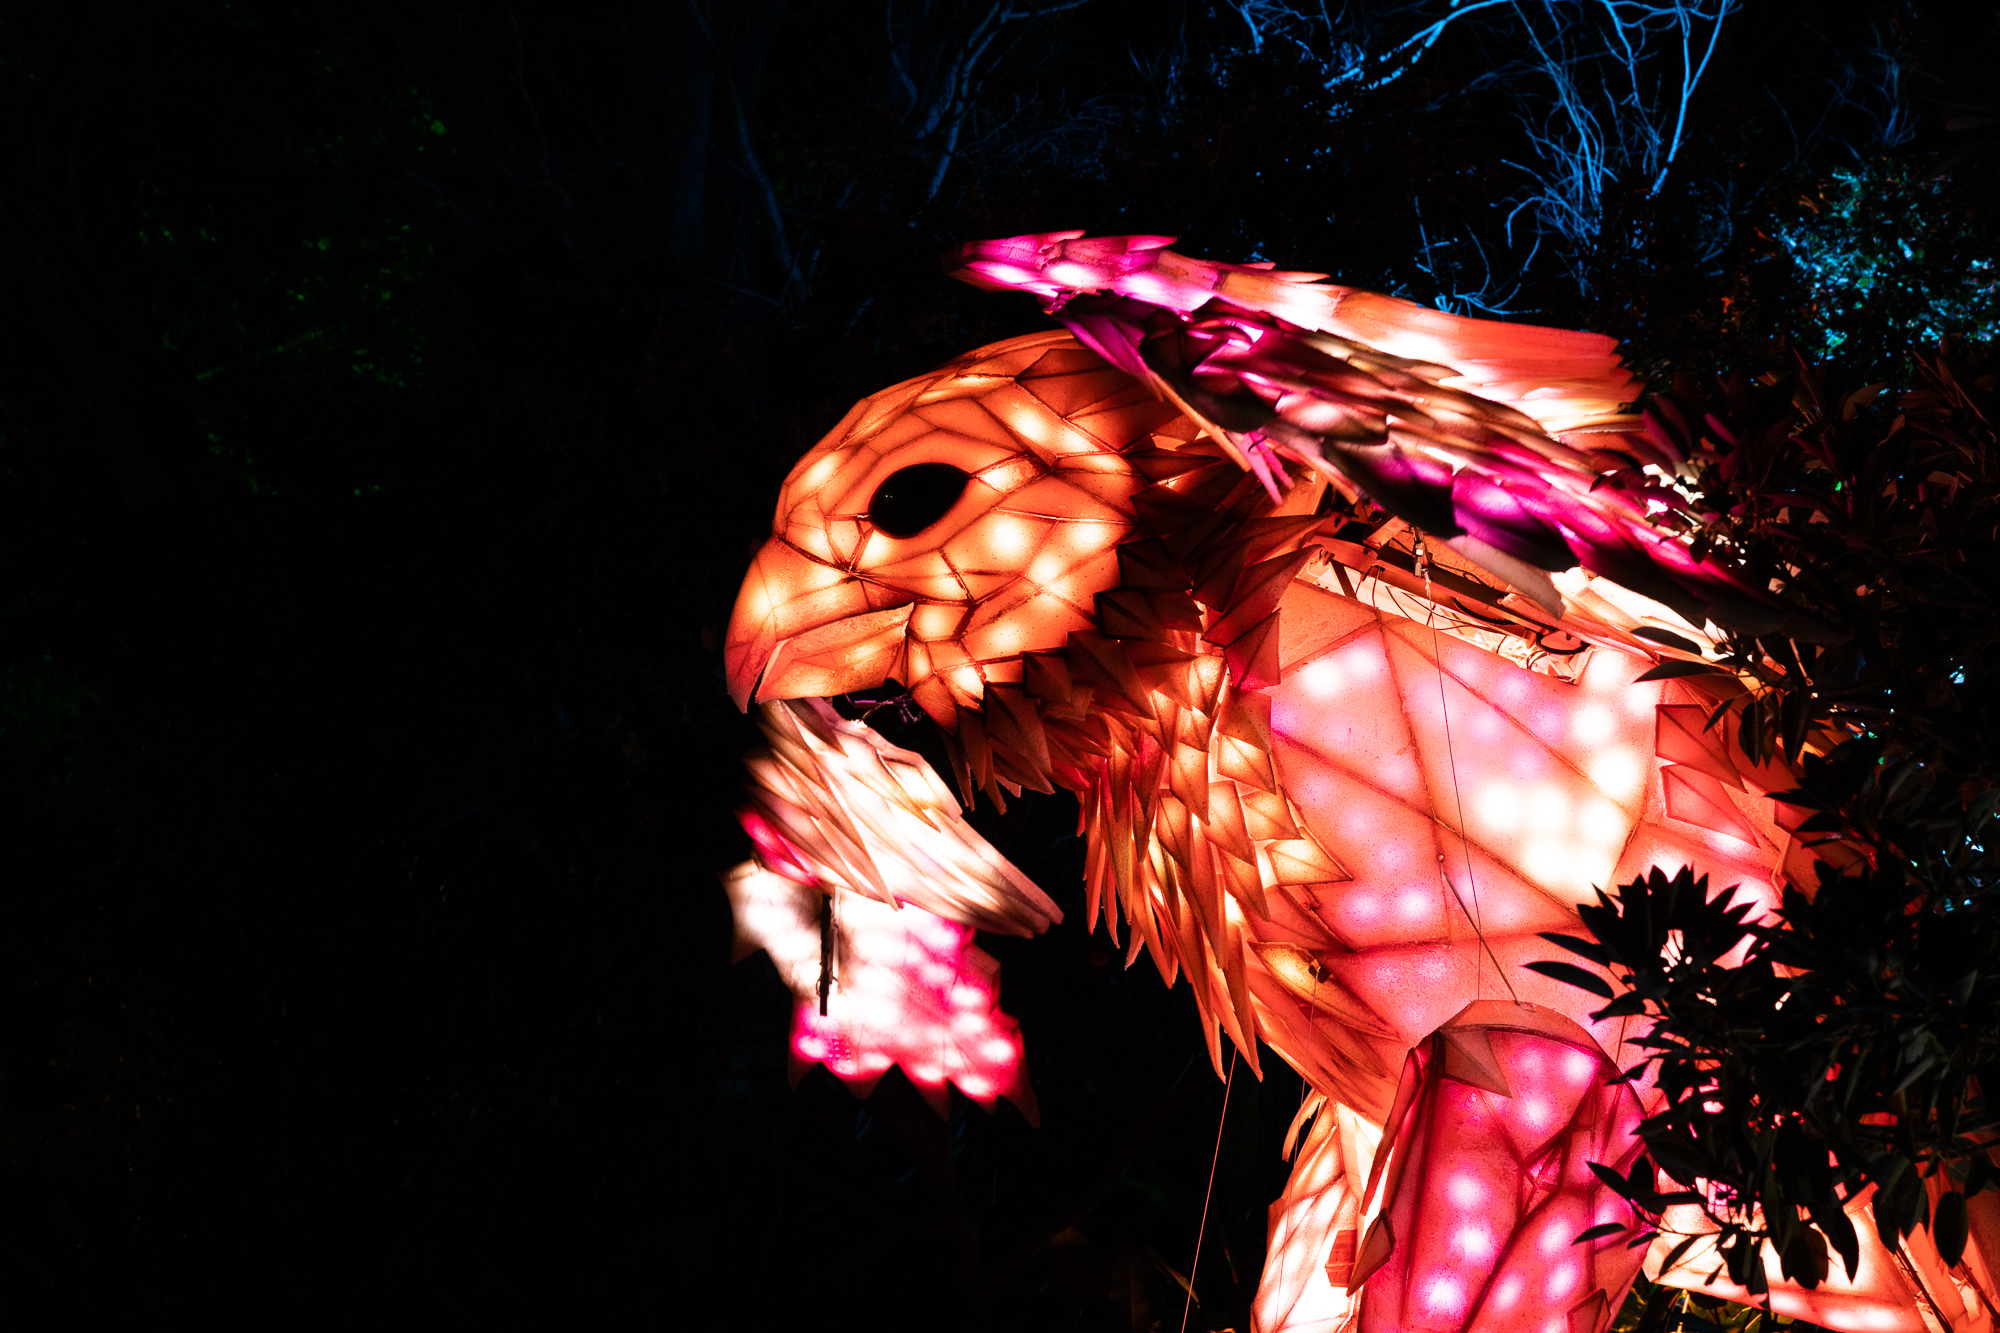 Light Creatures lantern of The Falcon at the Adelaide Zoo